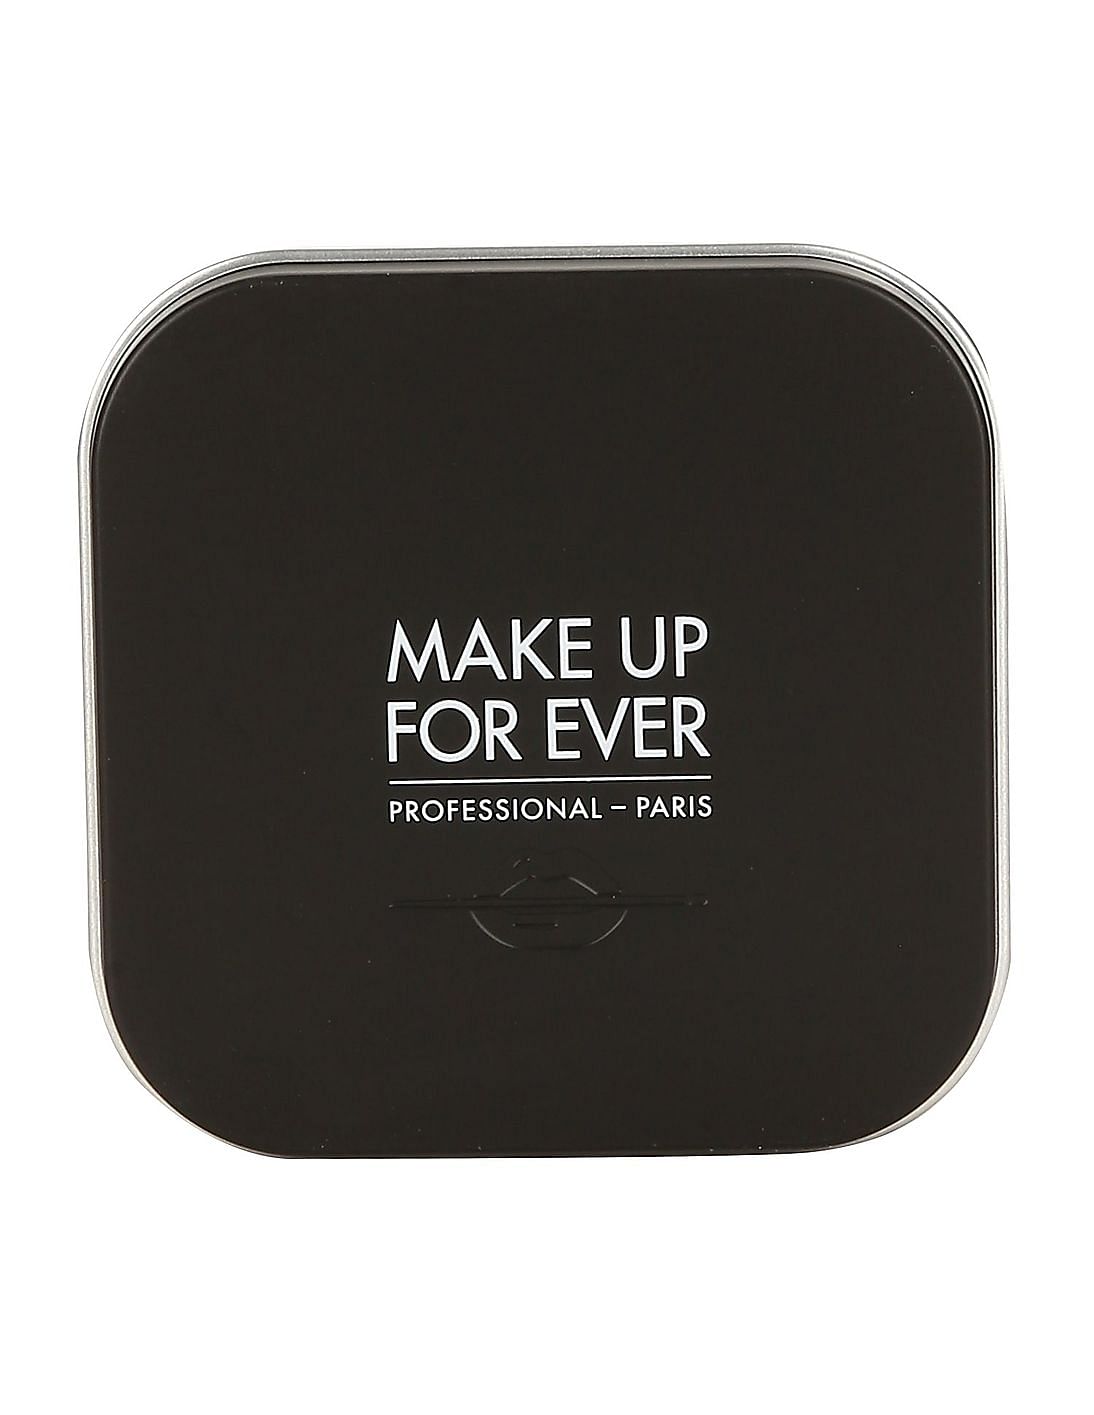 Buy MAKE UP FOR EVER Refillable Makeup Palette - Large - NNNOW.com